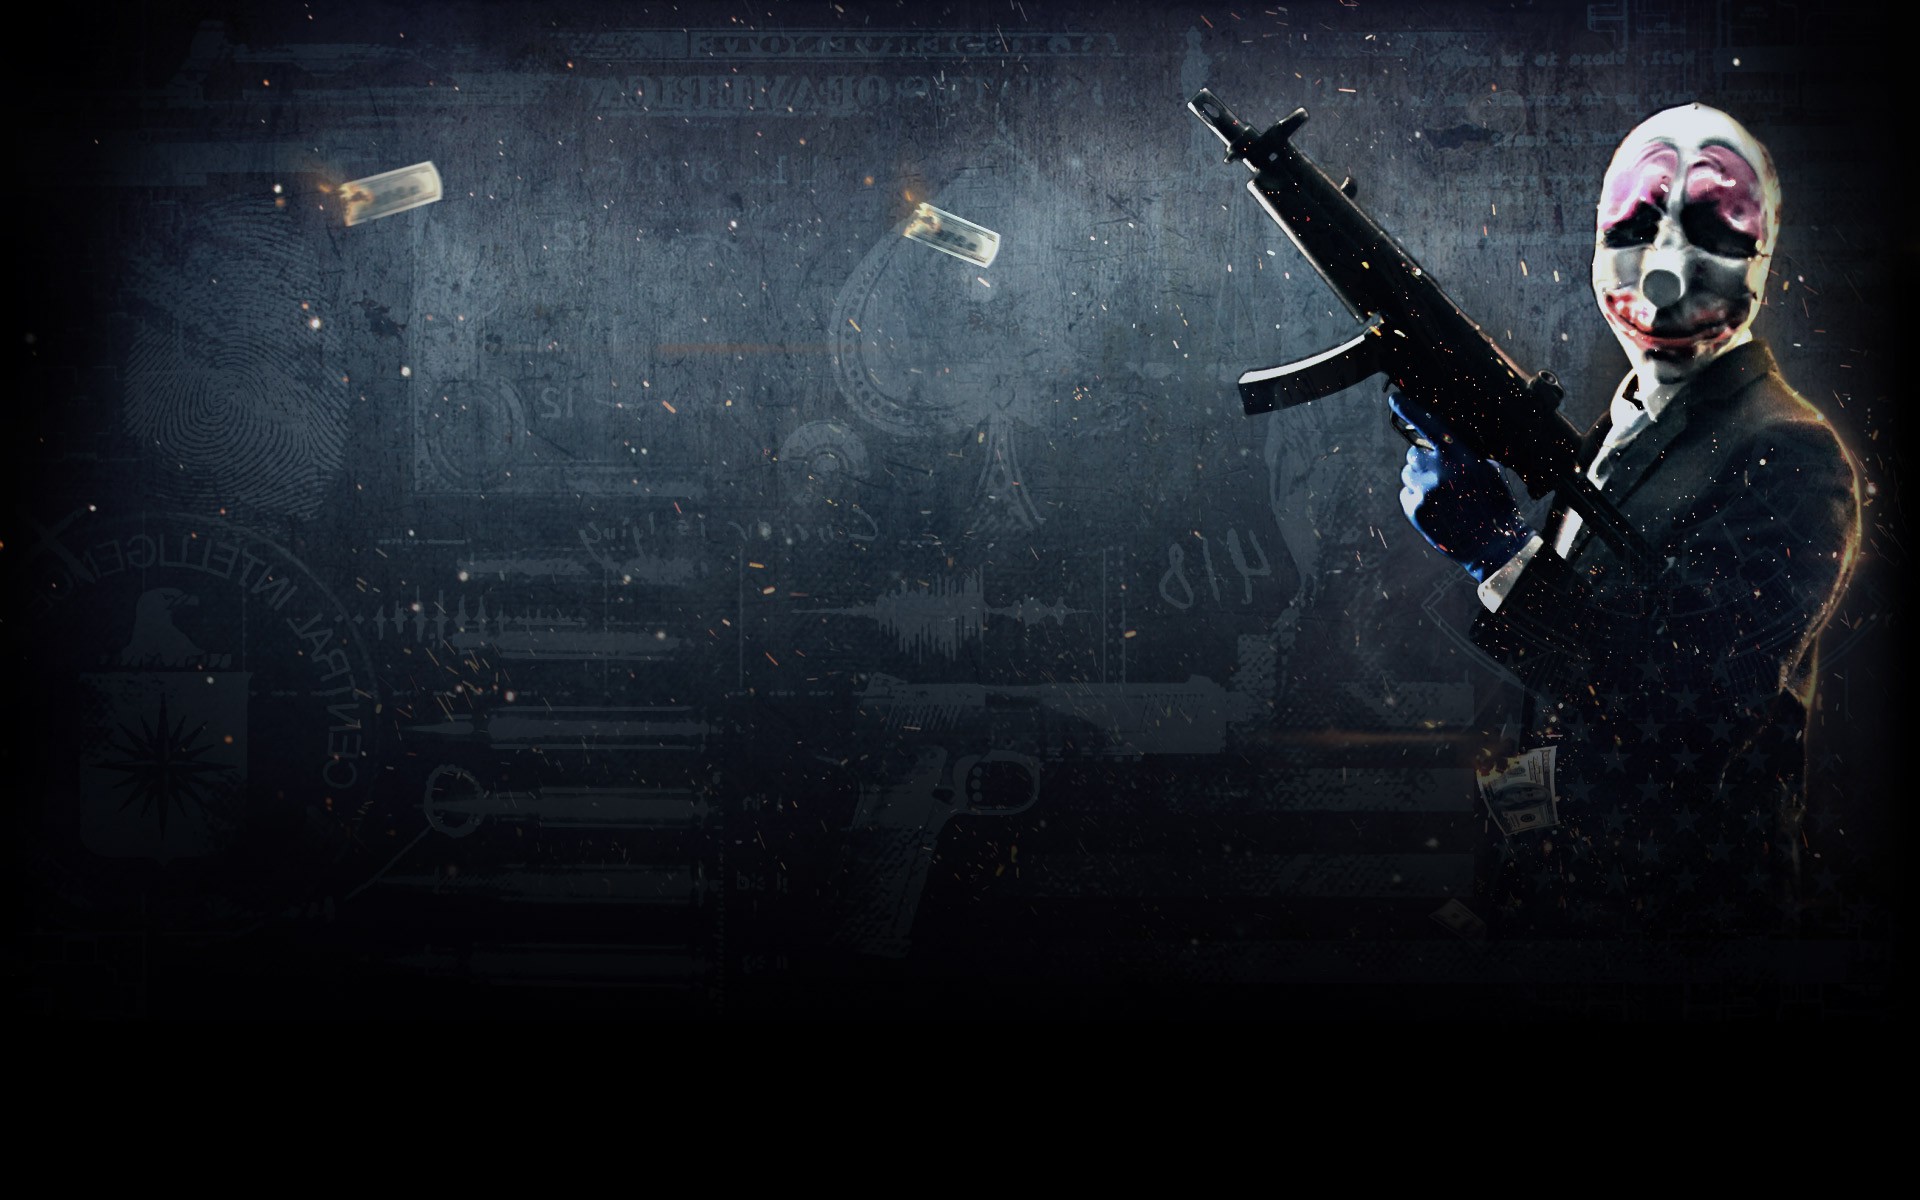 payday 2 wallpaper hd,digital compositing,darkness,movie,fictional character,supervillain